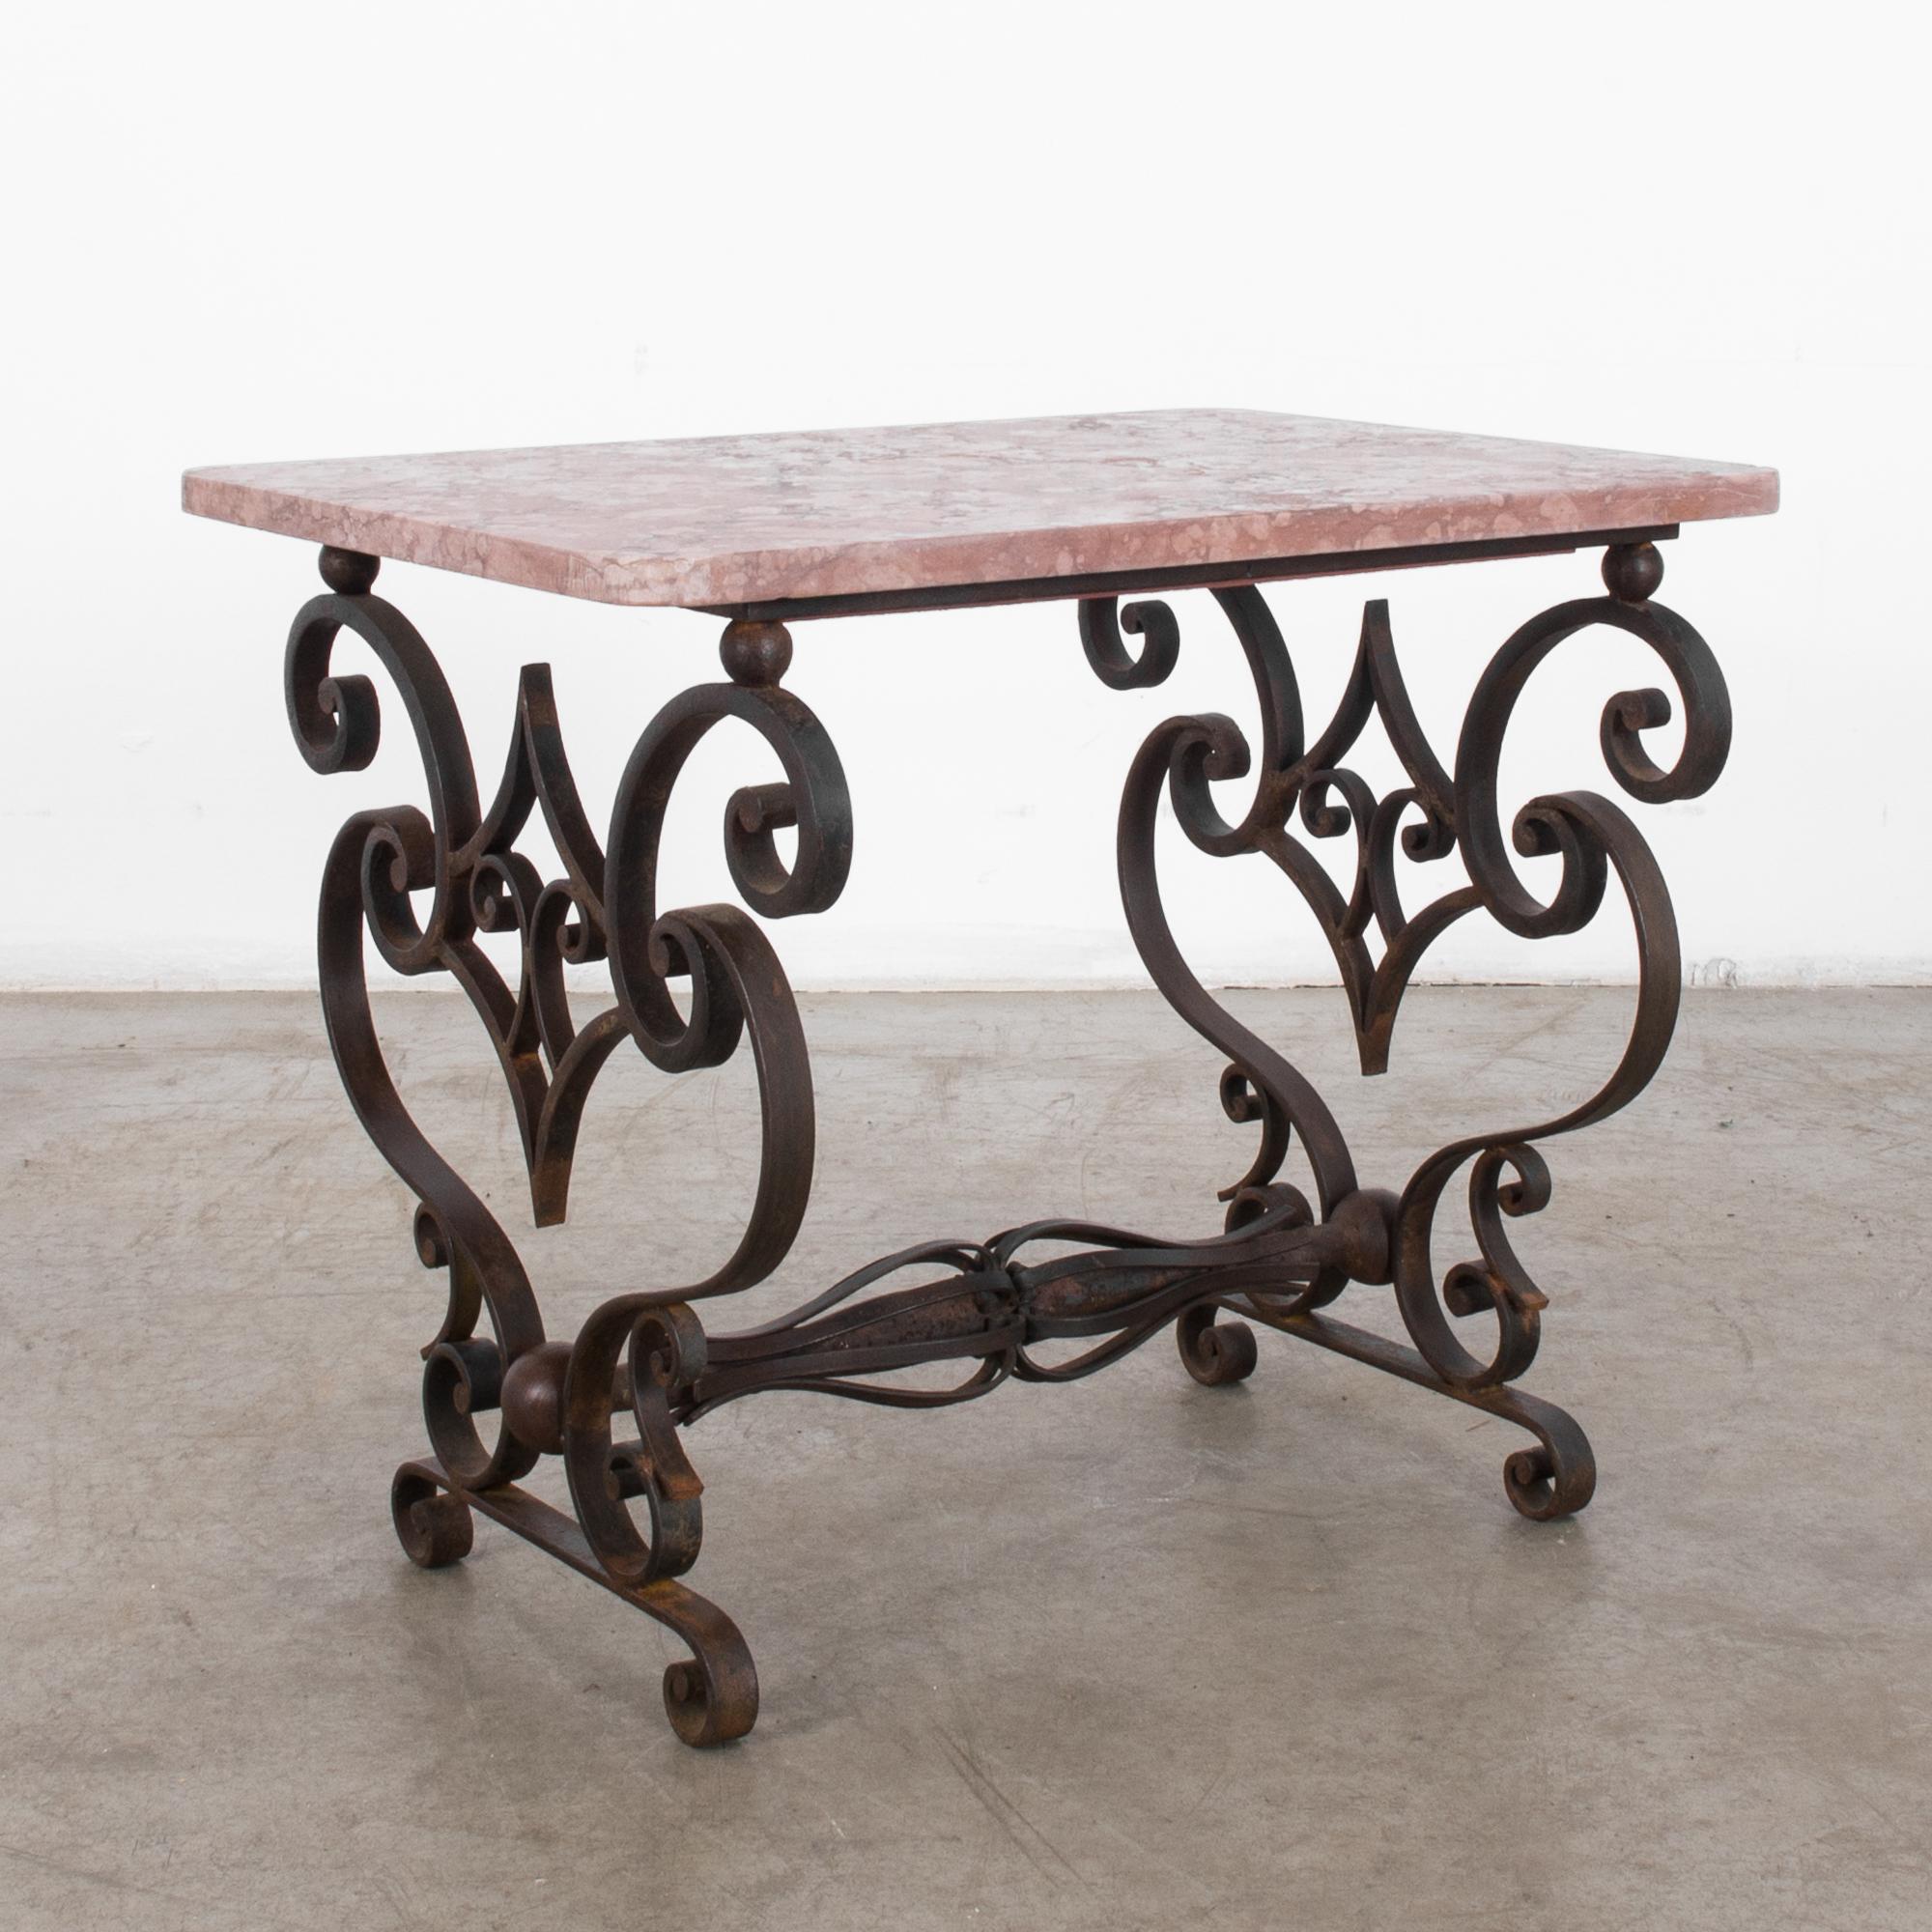 French Provincial 1940s French Iron and Marble Coffee Table